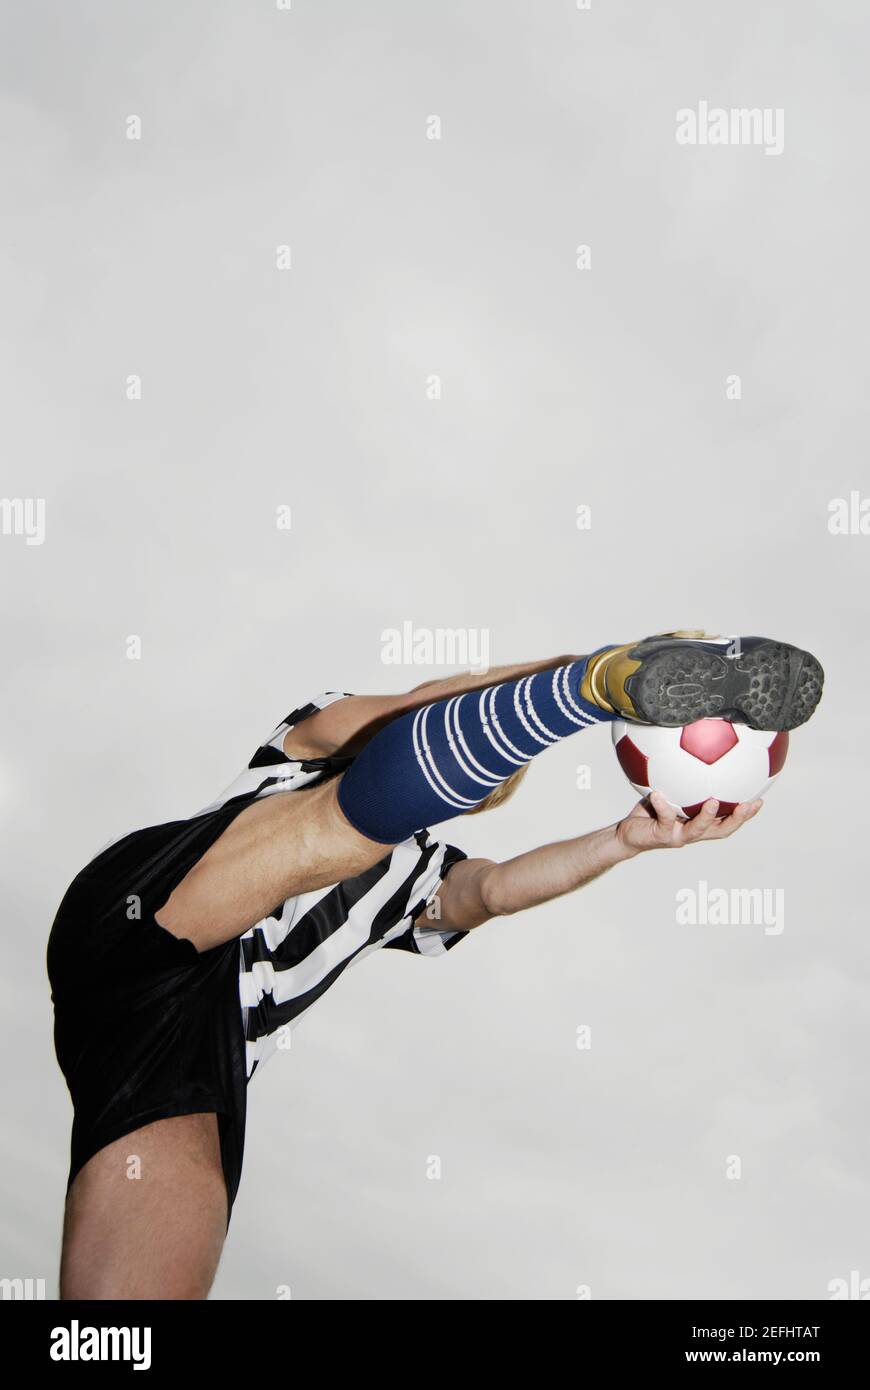 Low angle view of a soccer player kicking a soccer ball Stock Photo